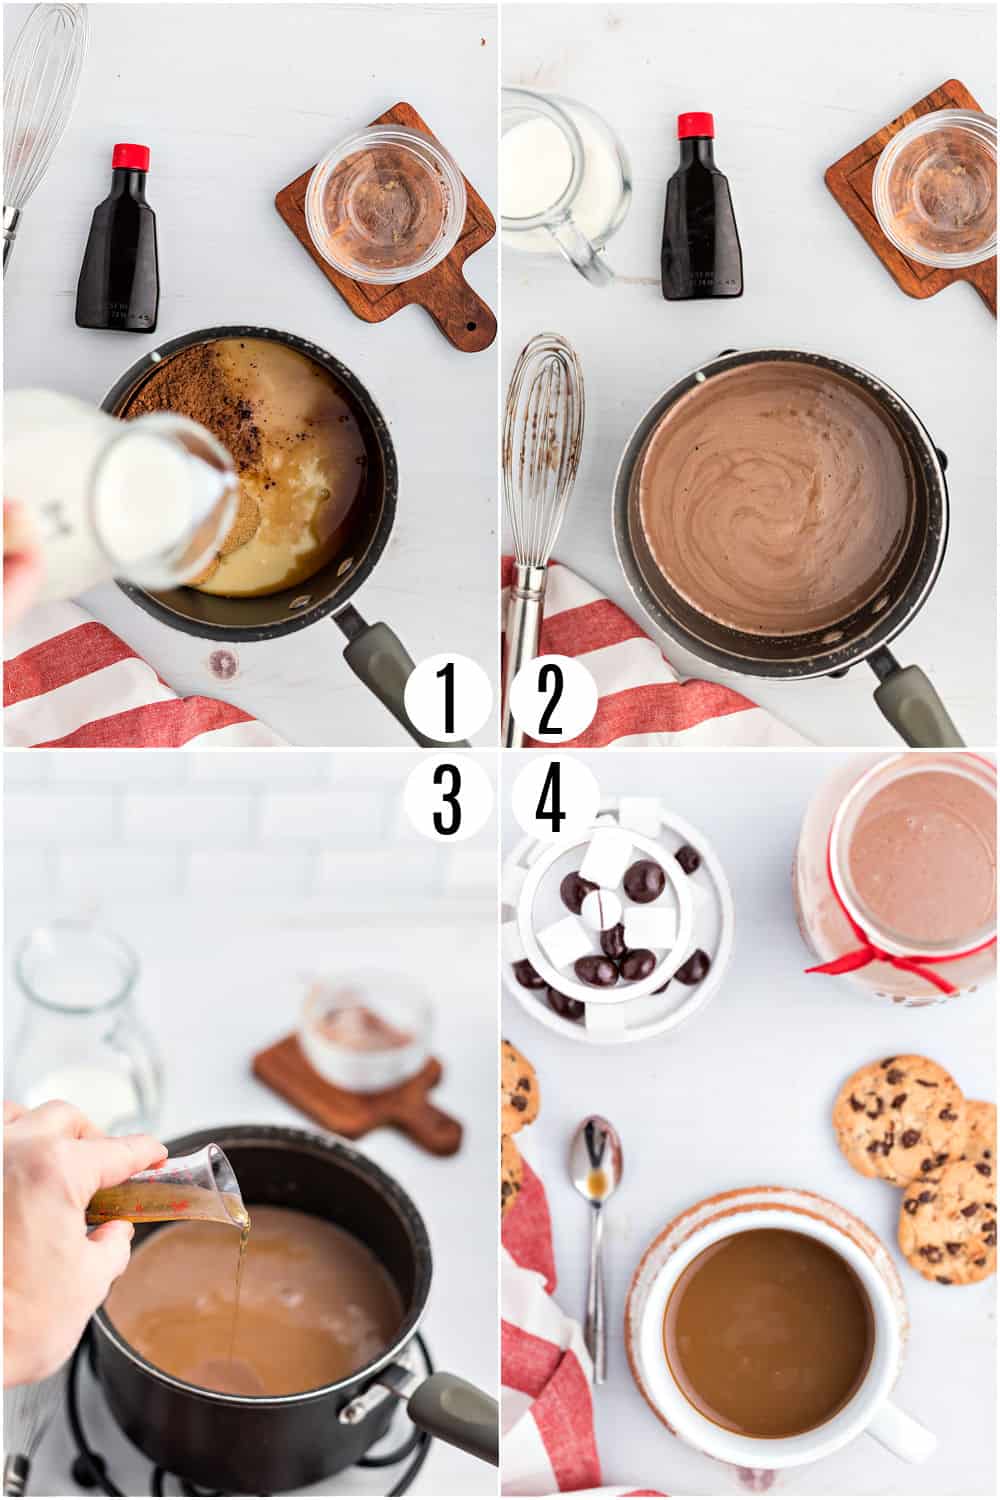 Step by step photos showing how to make chocolate chip coffee creamer.